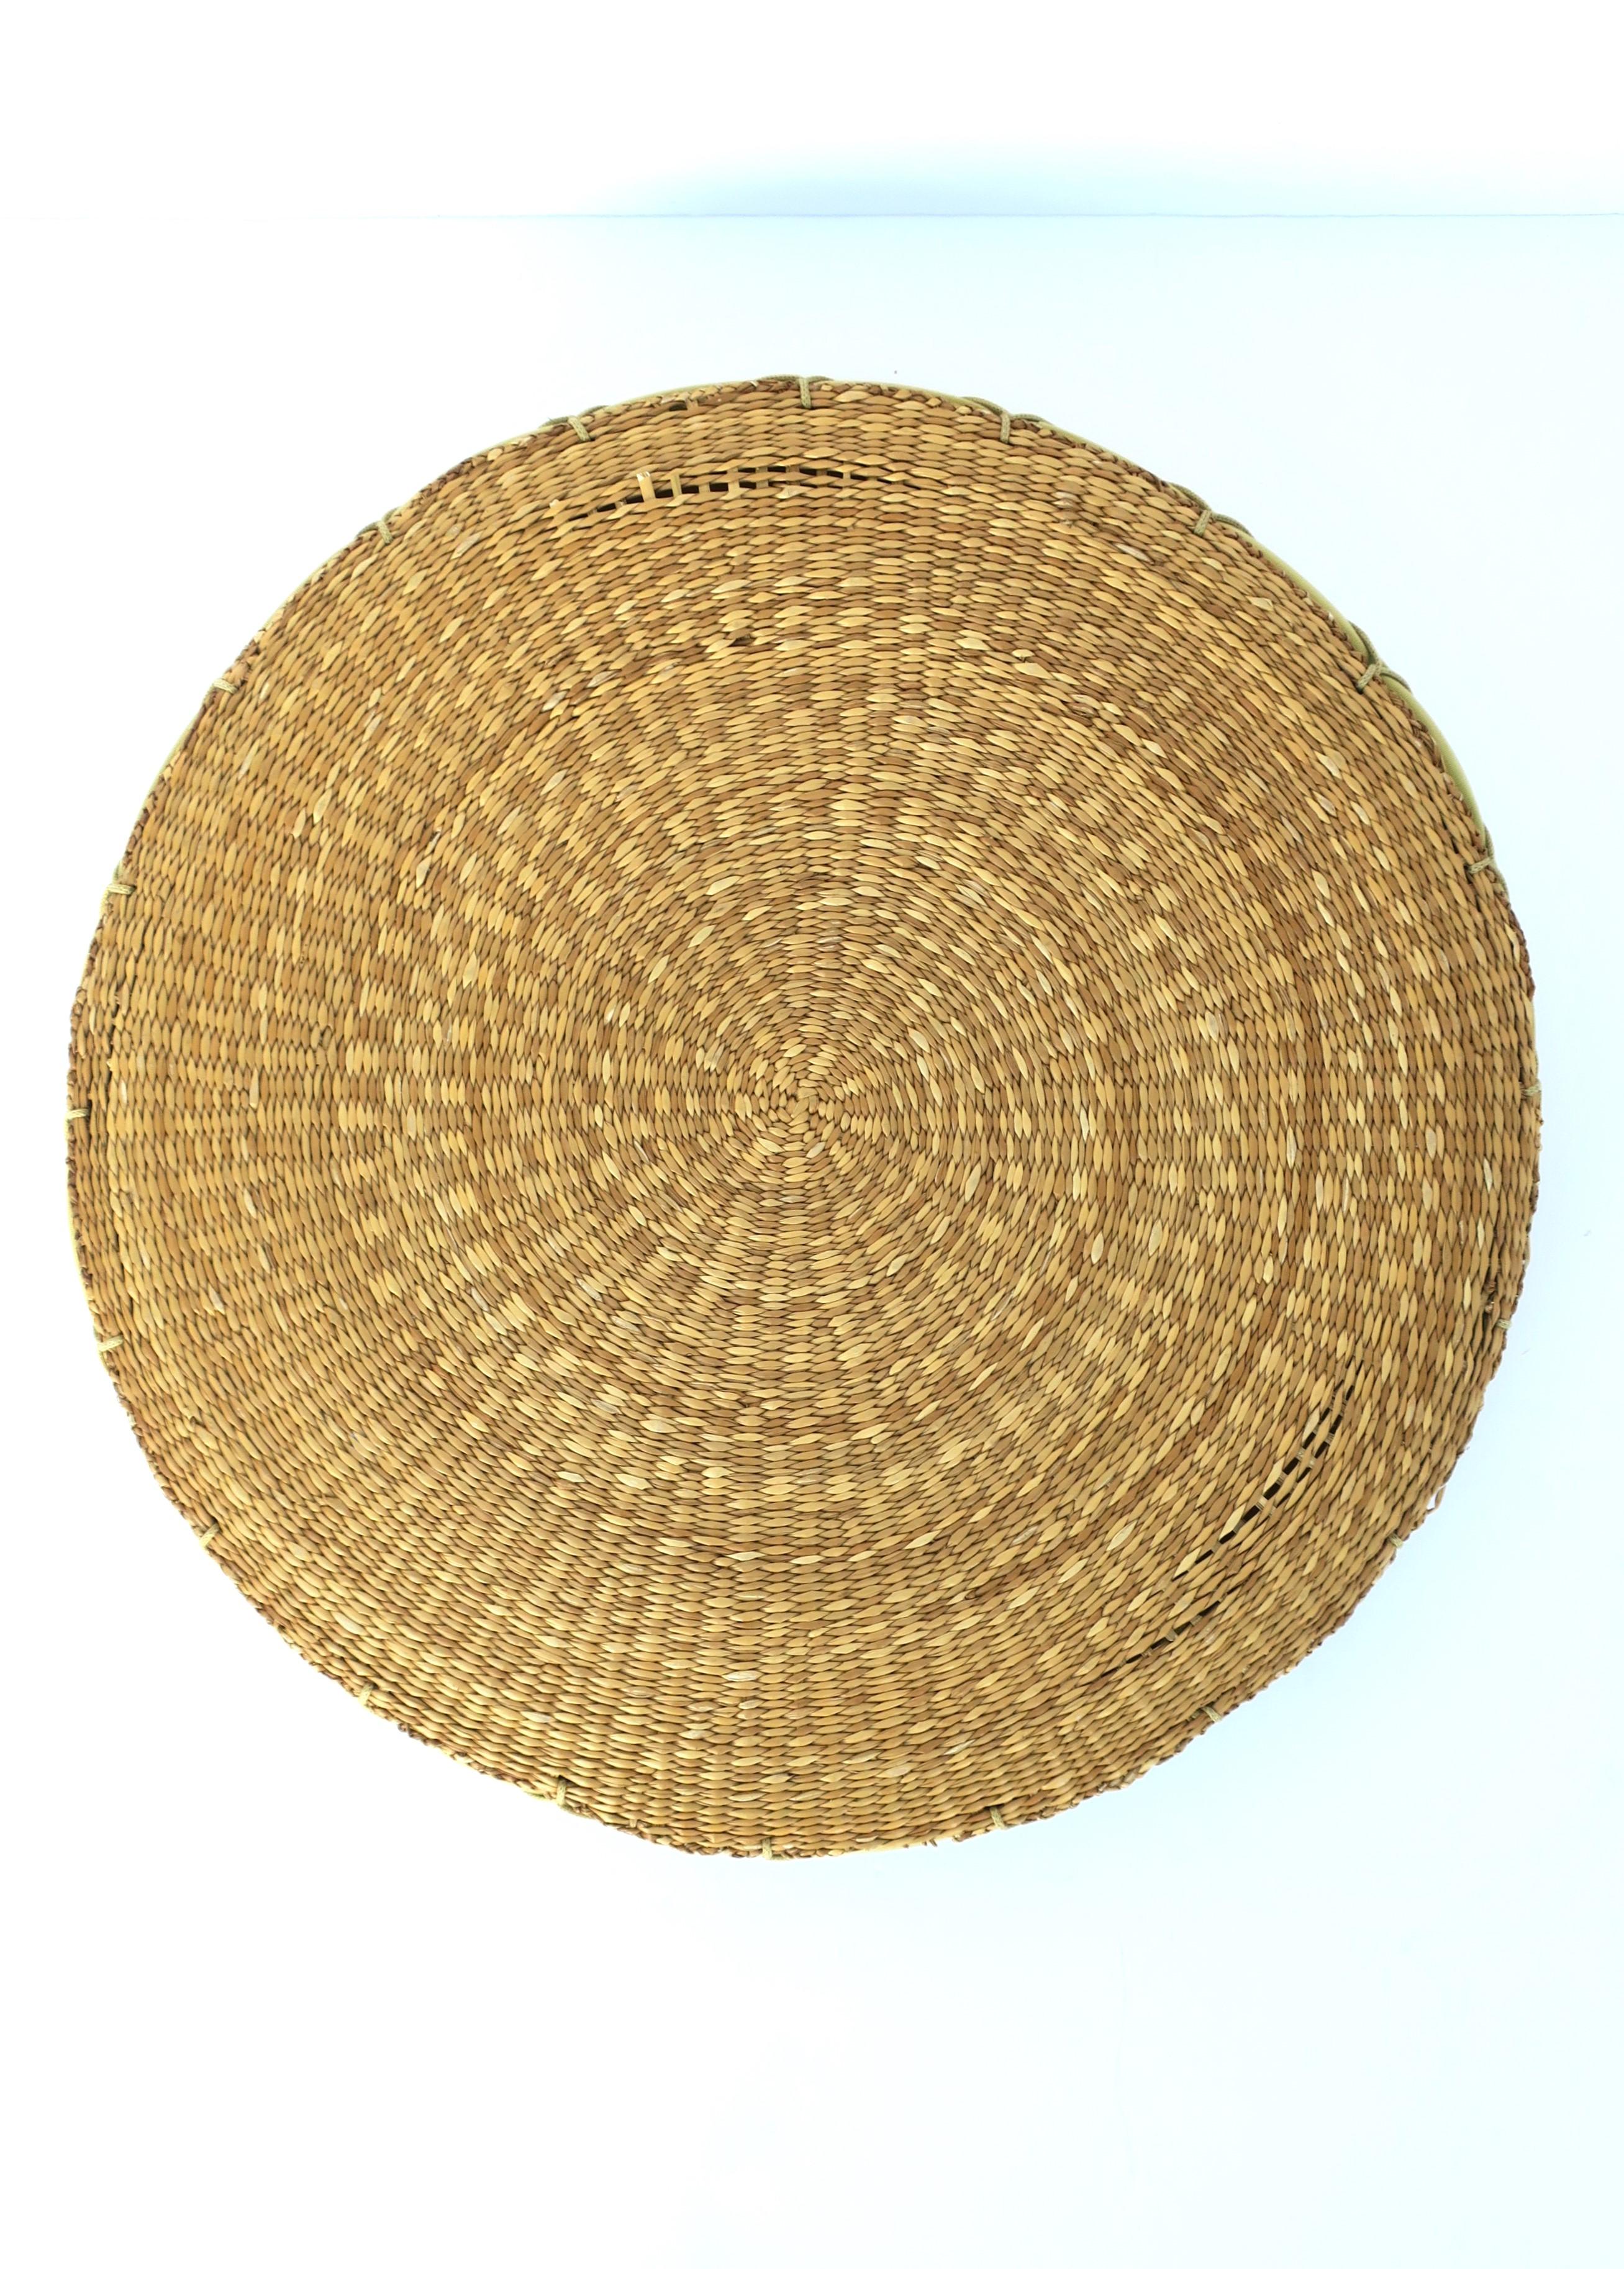 Wicker Seat or Floor Cushion, Green and Tan For Sale 7